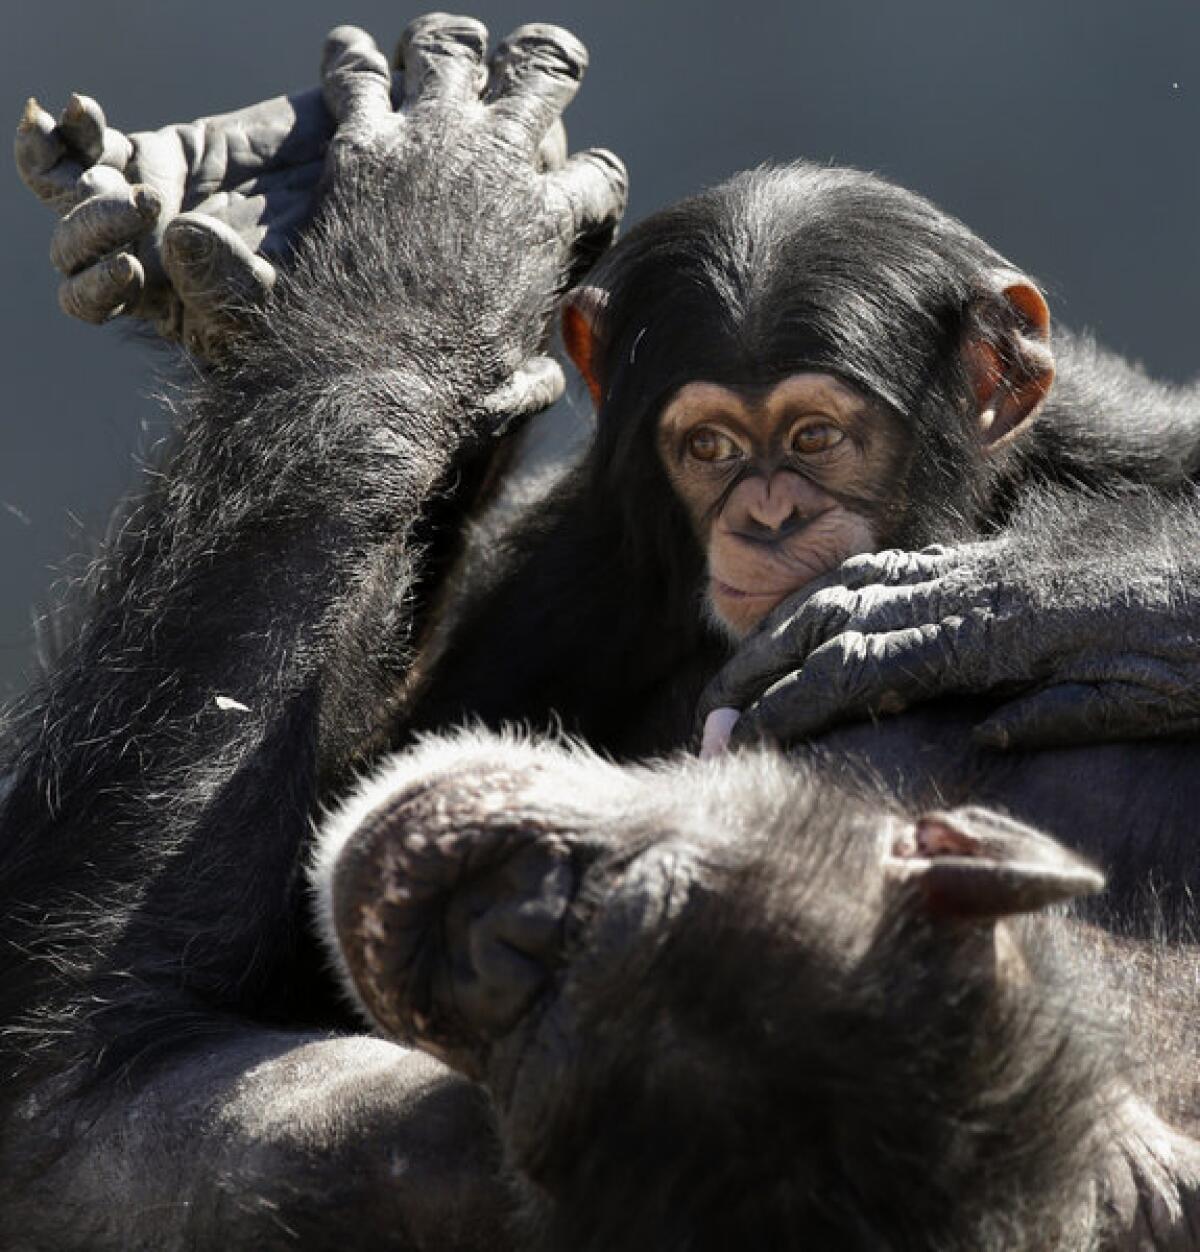 Proposed guidelines from the U.S. Fish and Wildlife seek to reclassify chimps as 'endangered' rather than 'threatened,' a status that offers the animal less protection. Above: A mother chimp relaxing with her baby at Chimp Haven in Keithville, La.